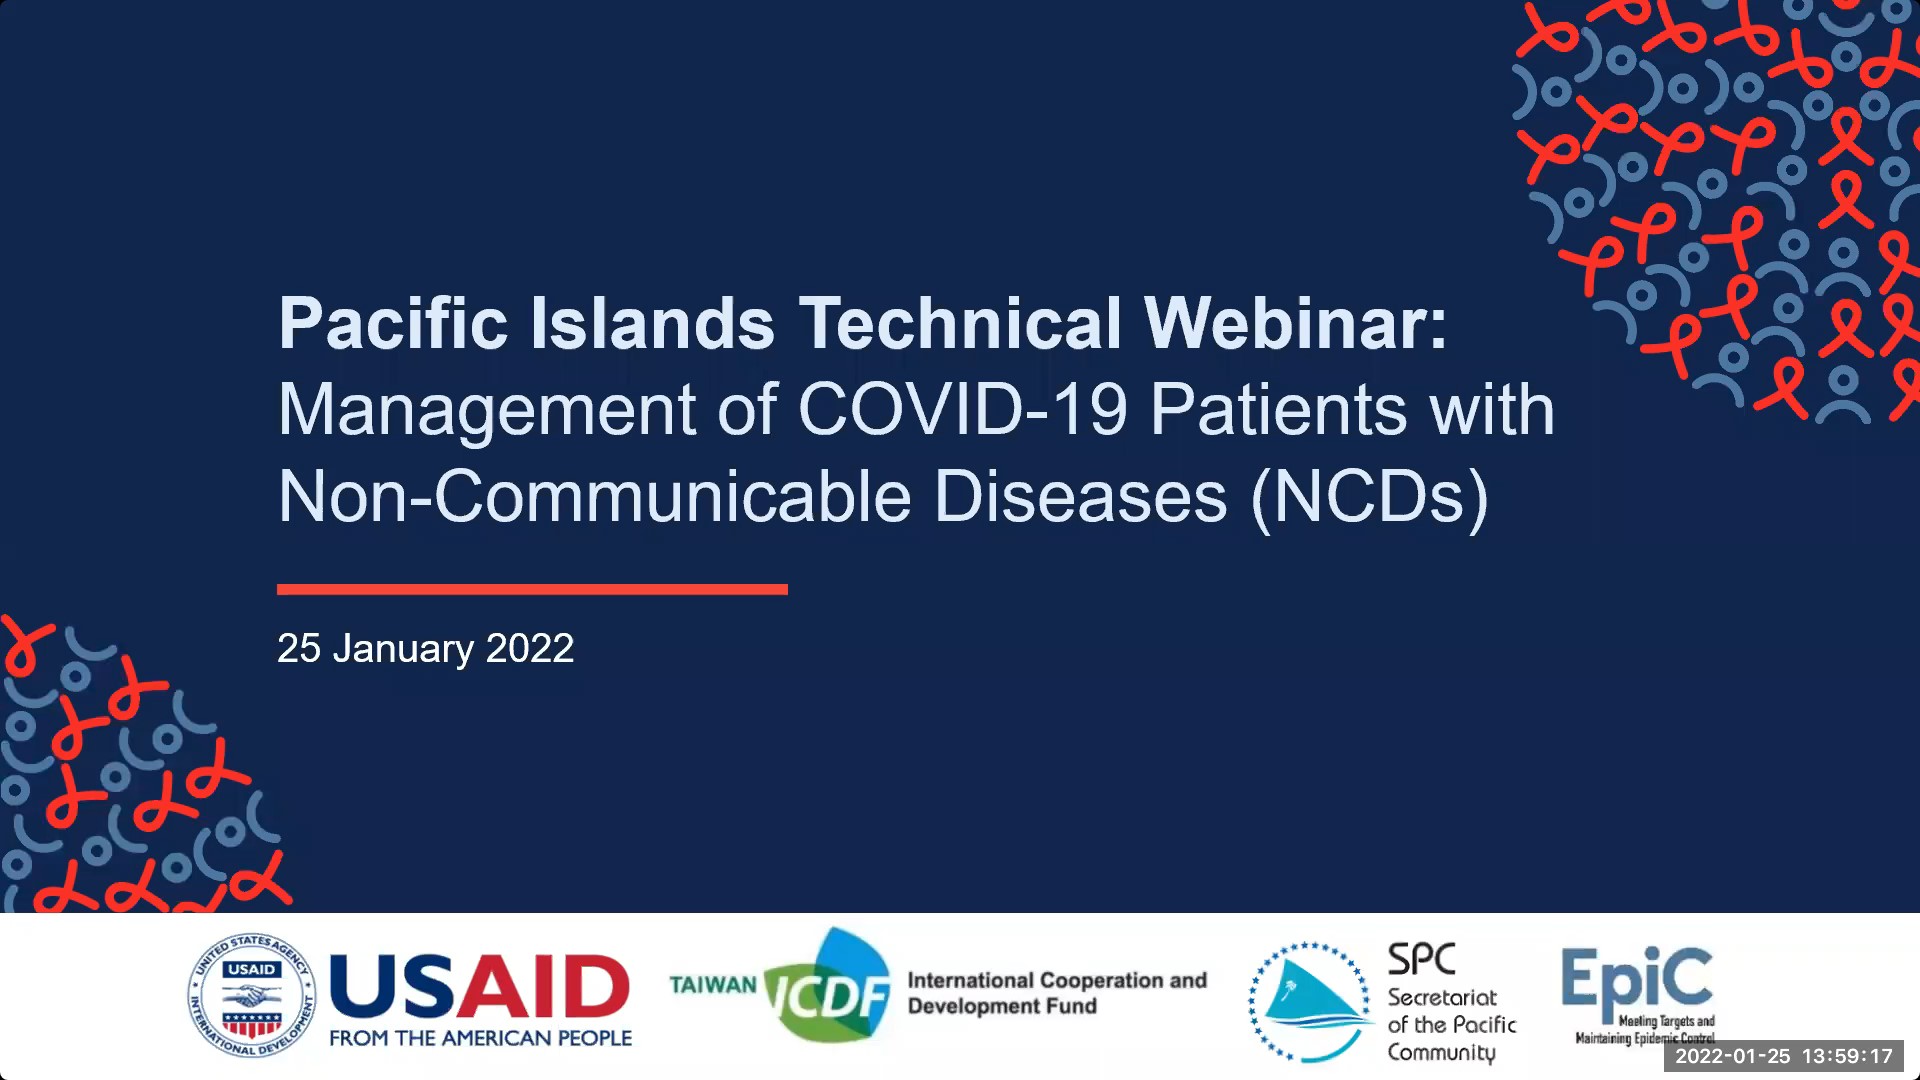 TaiwanICDF and USAID Cooperate for COVID-19 Patients with Non-Communicable Disease